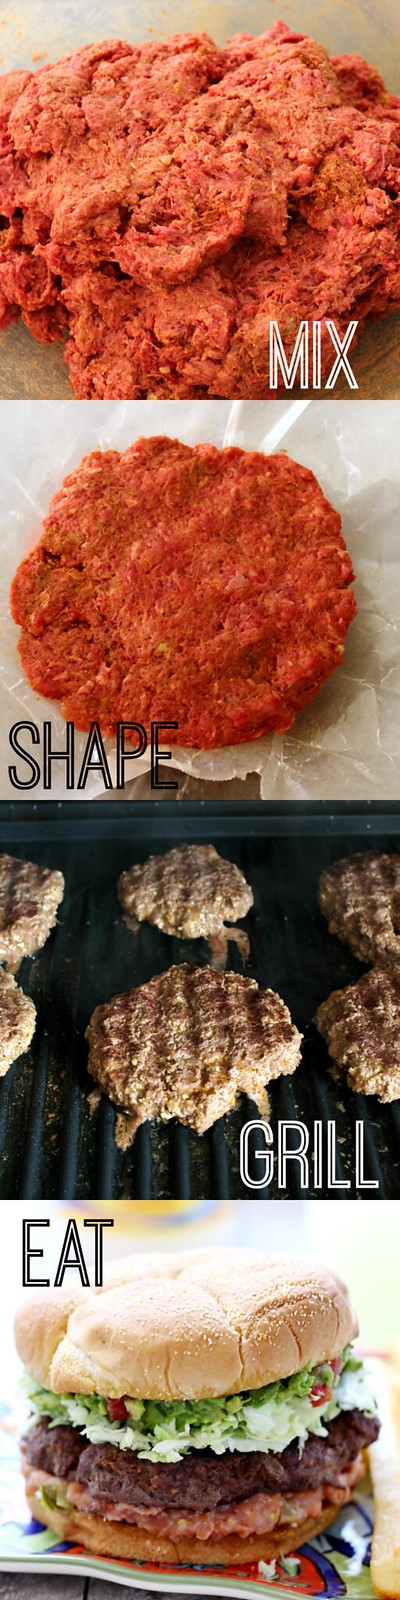 Four steps shown to create Tijuana Burger from raw ground beef being formed into patties, to grilling burgers, to assembly.